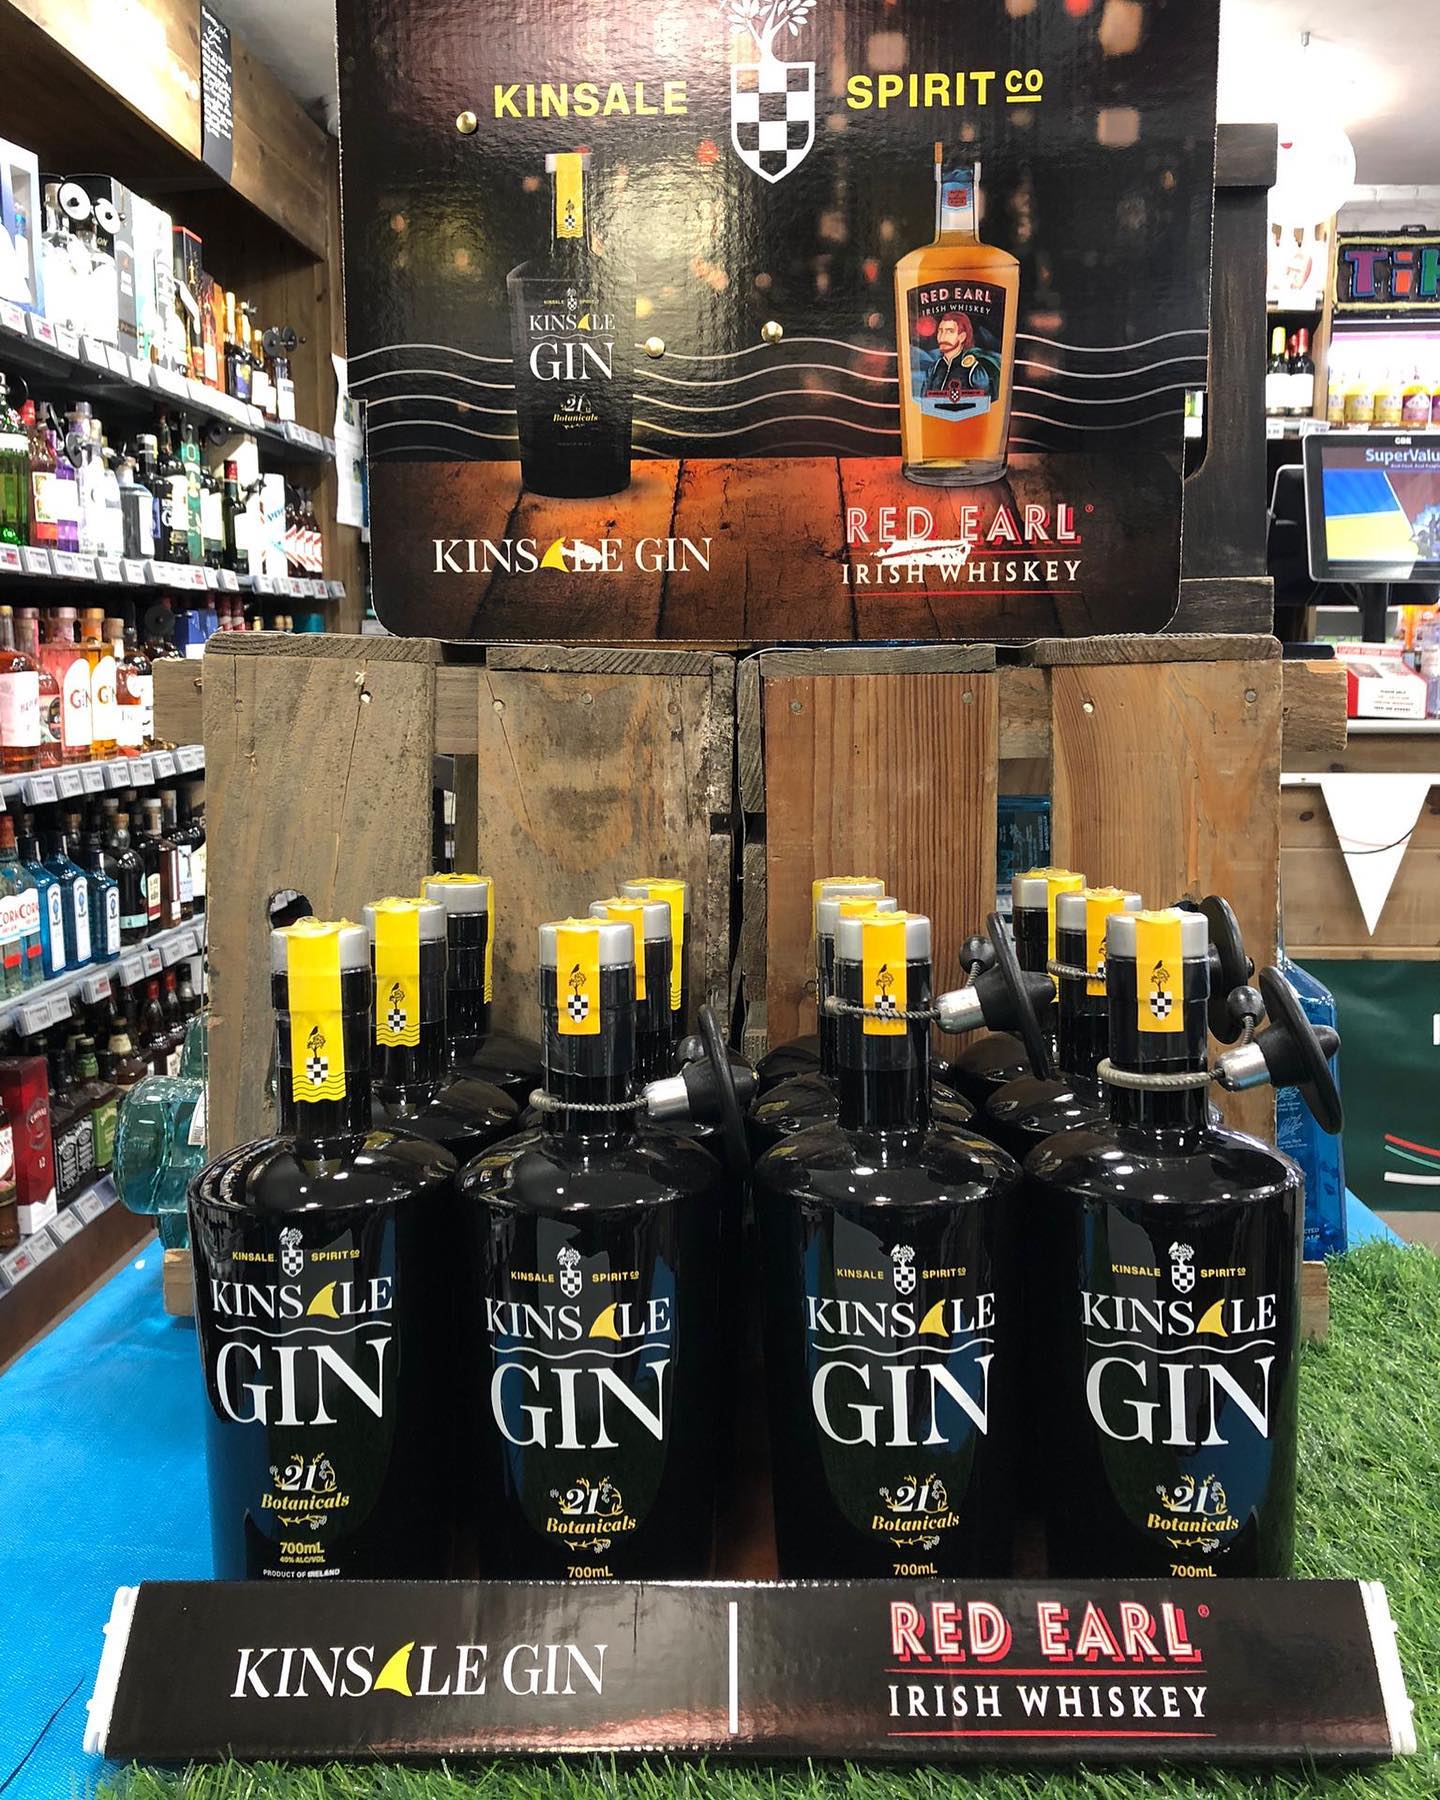 💥🍸 FLASH SALE: Our KINSALE GIN was €40 and now Only €25 at selected @supervalu_irl stores nationwide. 💥 Act fast as this is a limited special offer, running until 9th June 2022.

 💛 Simply look for "THE GIN WITH THE FIN". 

☘️ Local botanicals are gathered seasonally and sensitively, leaving enough behind for the birds and future crops. The flavour of Kinsale Gin is truly of the Kinsale Irish countryside.

📍@supervalu_blackrock , Co. Cork
@ben_7_7 

#drinkresponsibly #supervalu  #onsale #flashsale #blackrock
#kinsalegin #kinsalespiritco #irishgin
#gin #gnt #irish #ireland